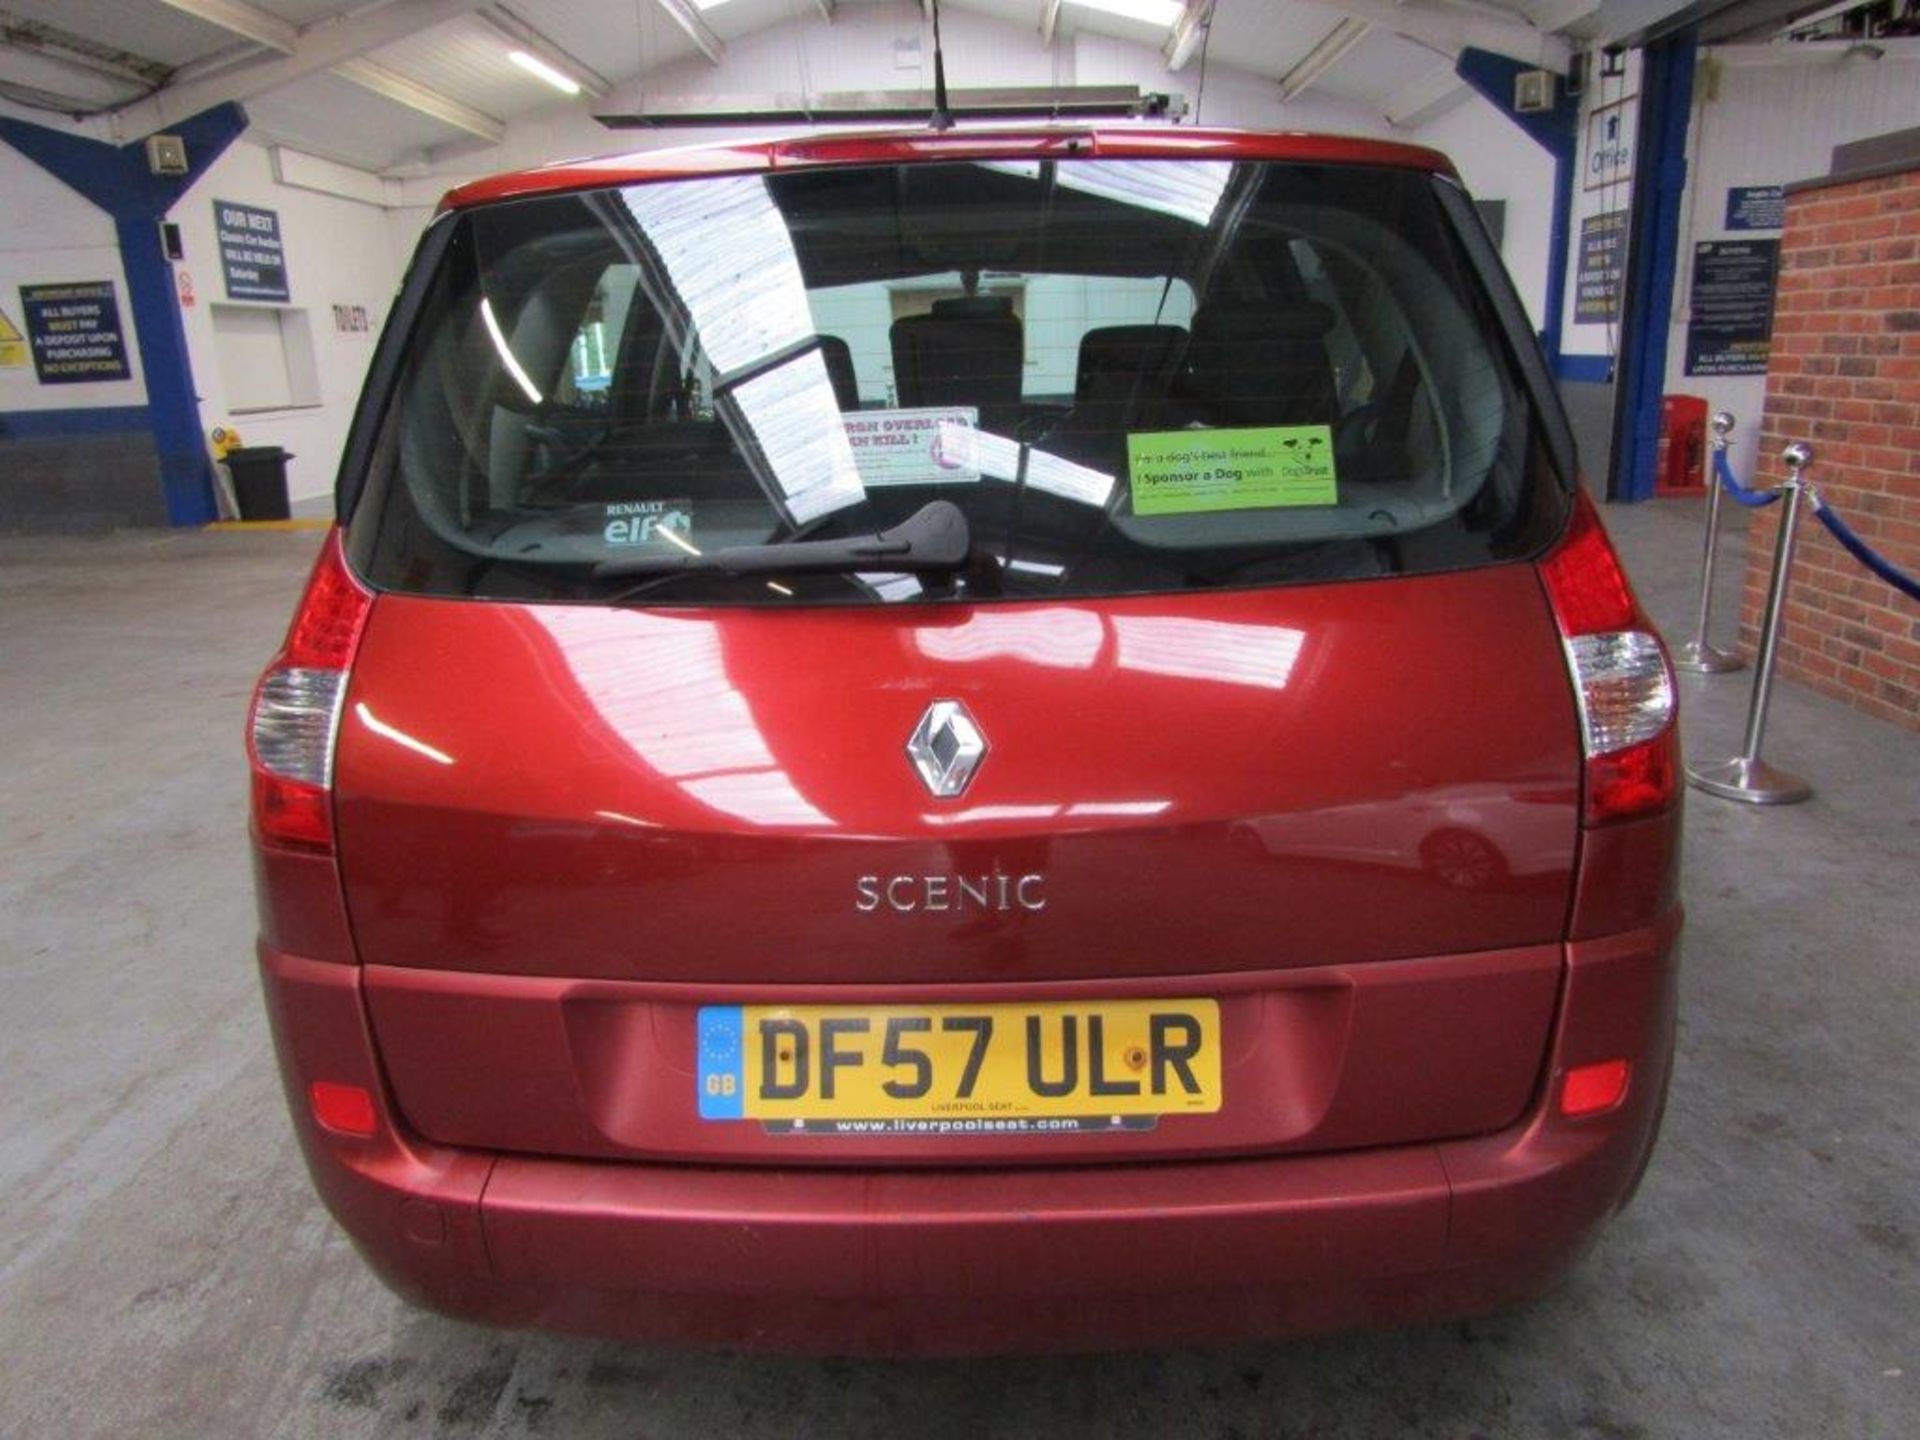 57 08 Renault Scenic Extreme VVT - Image 13 of 20